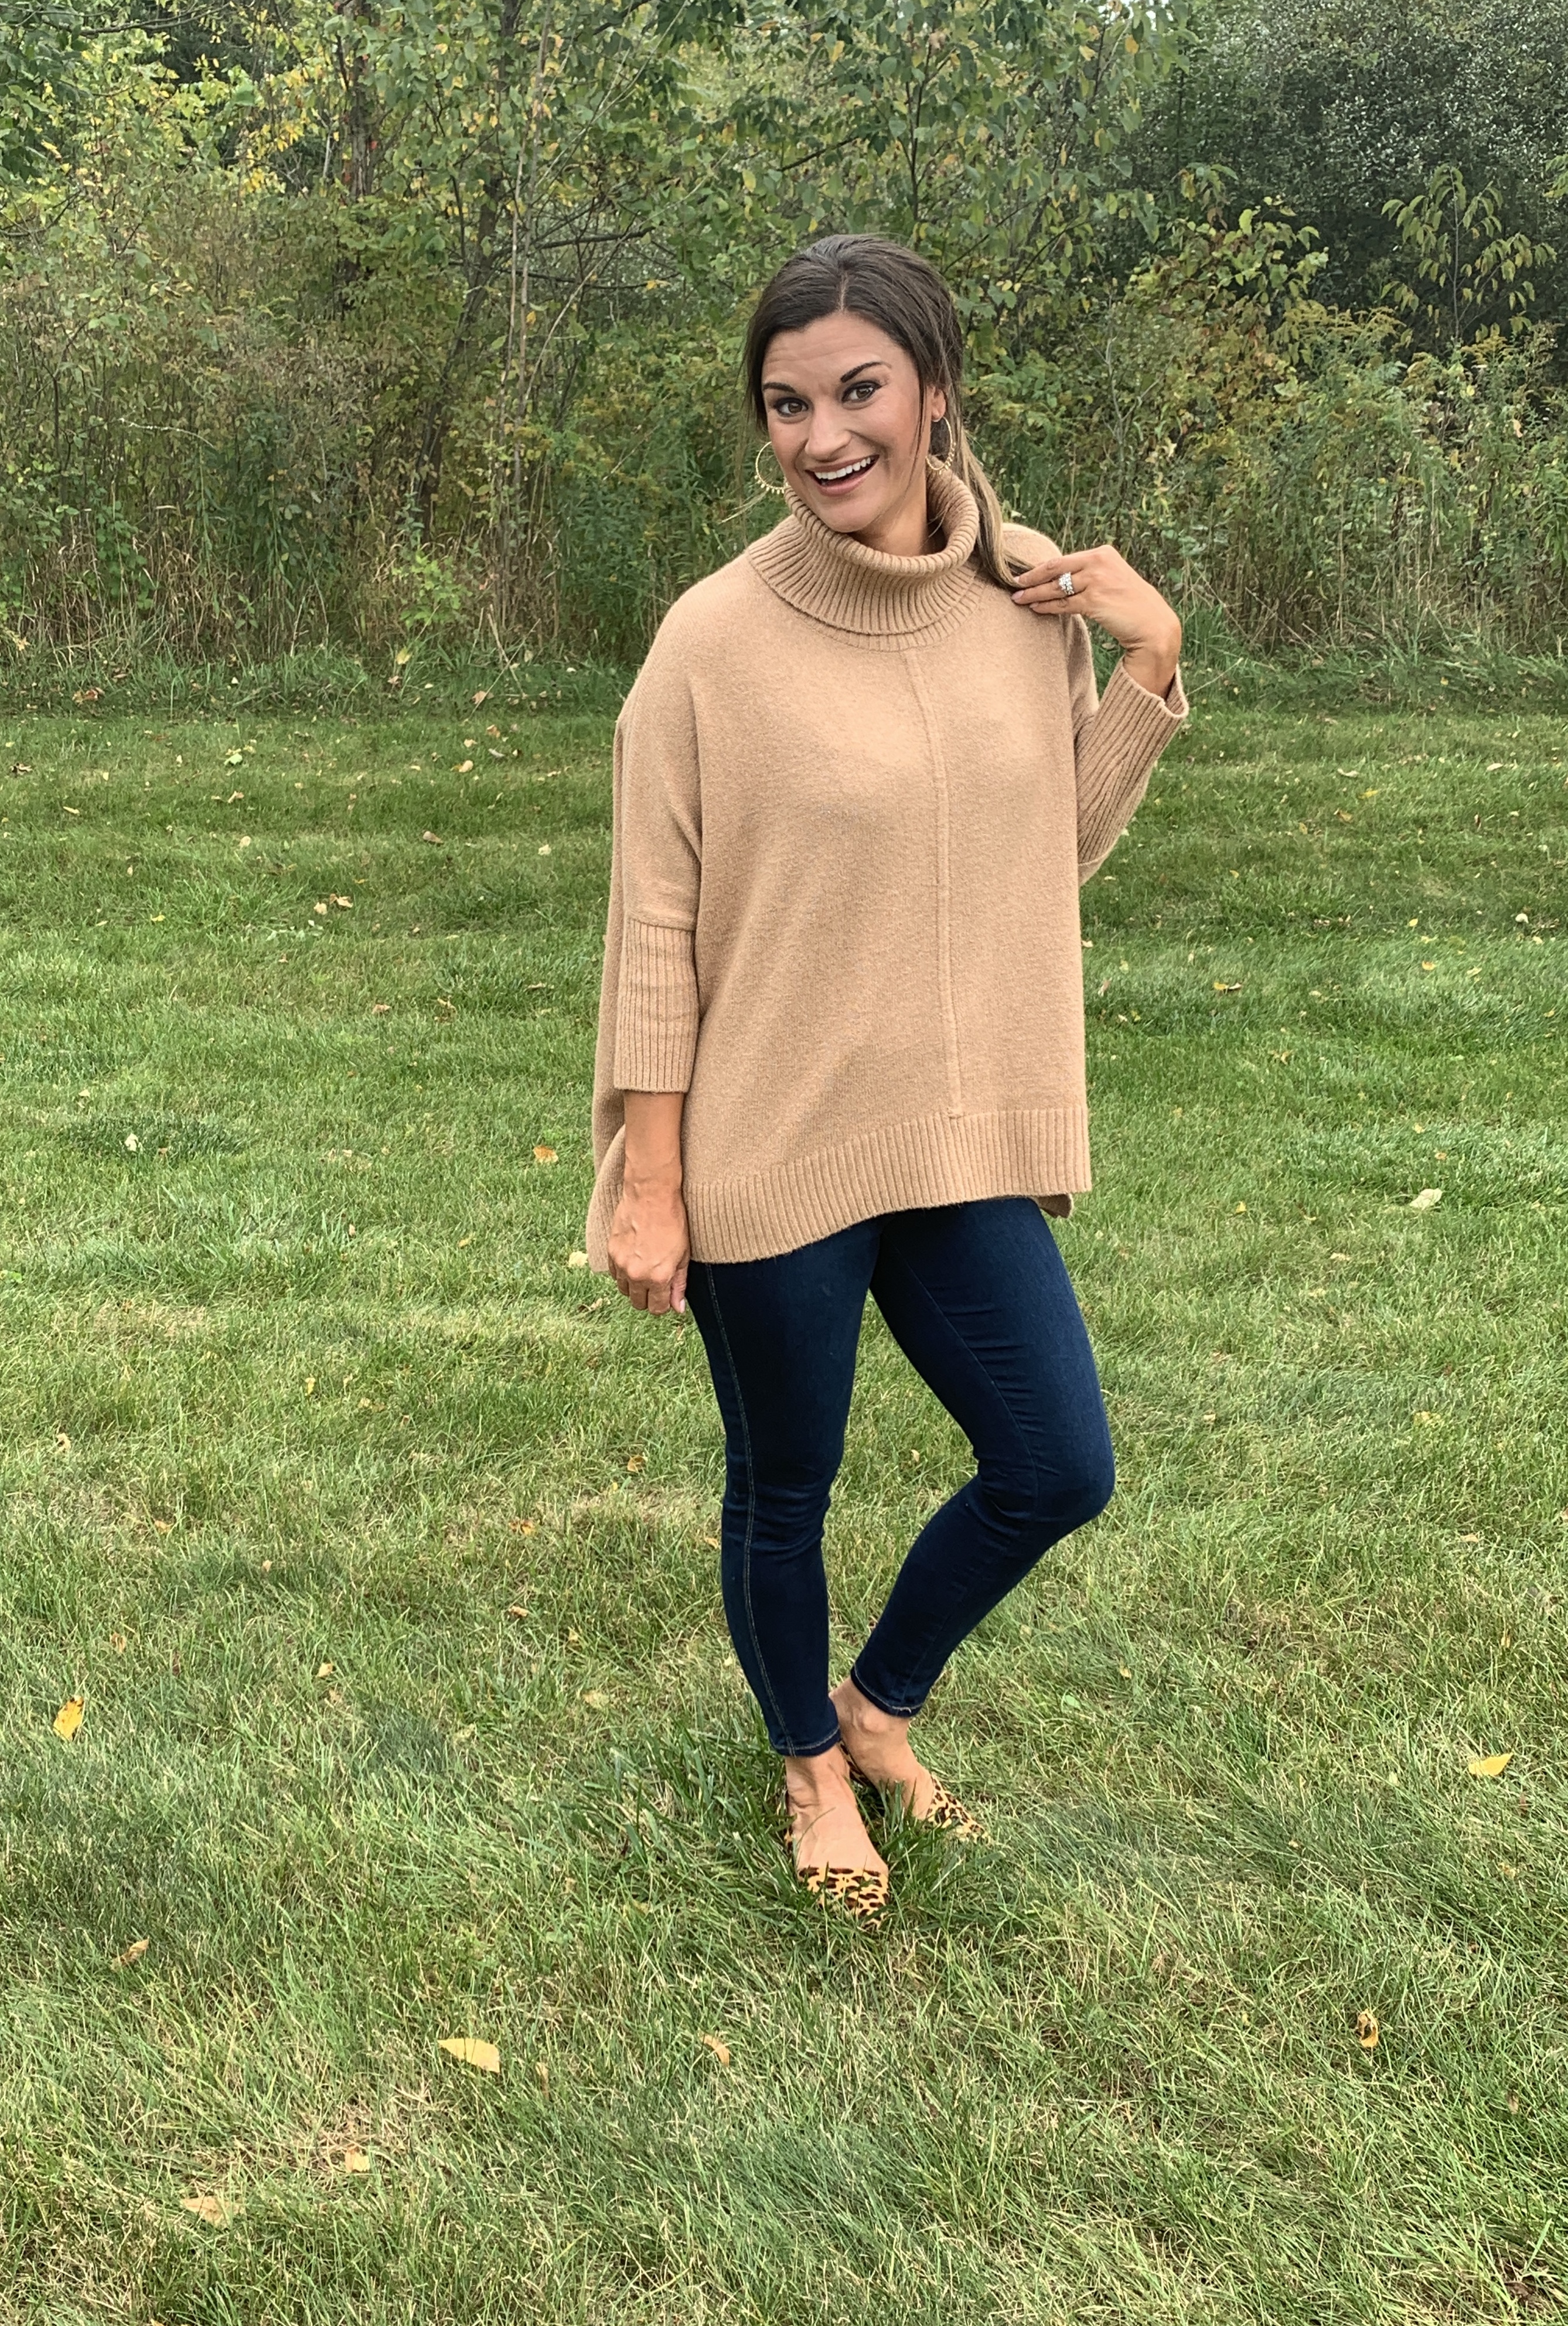 How to wear one tunic sweater 10 different ways!! When I saw this